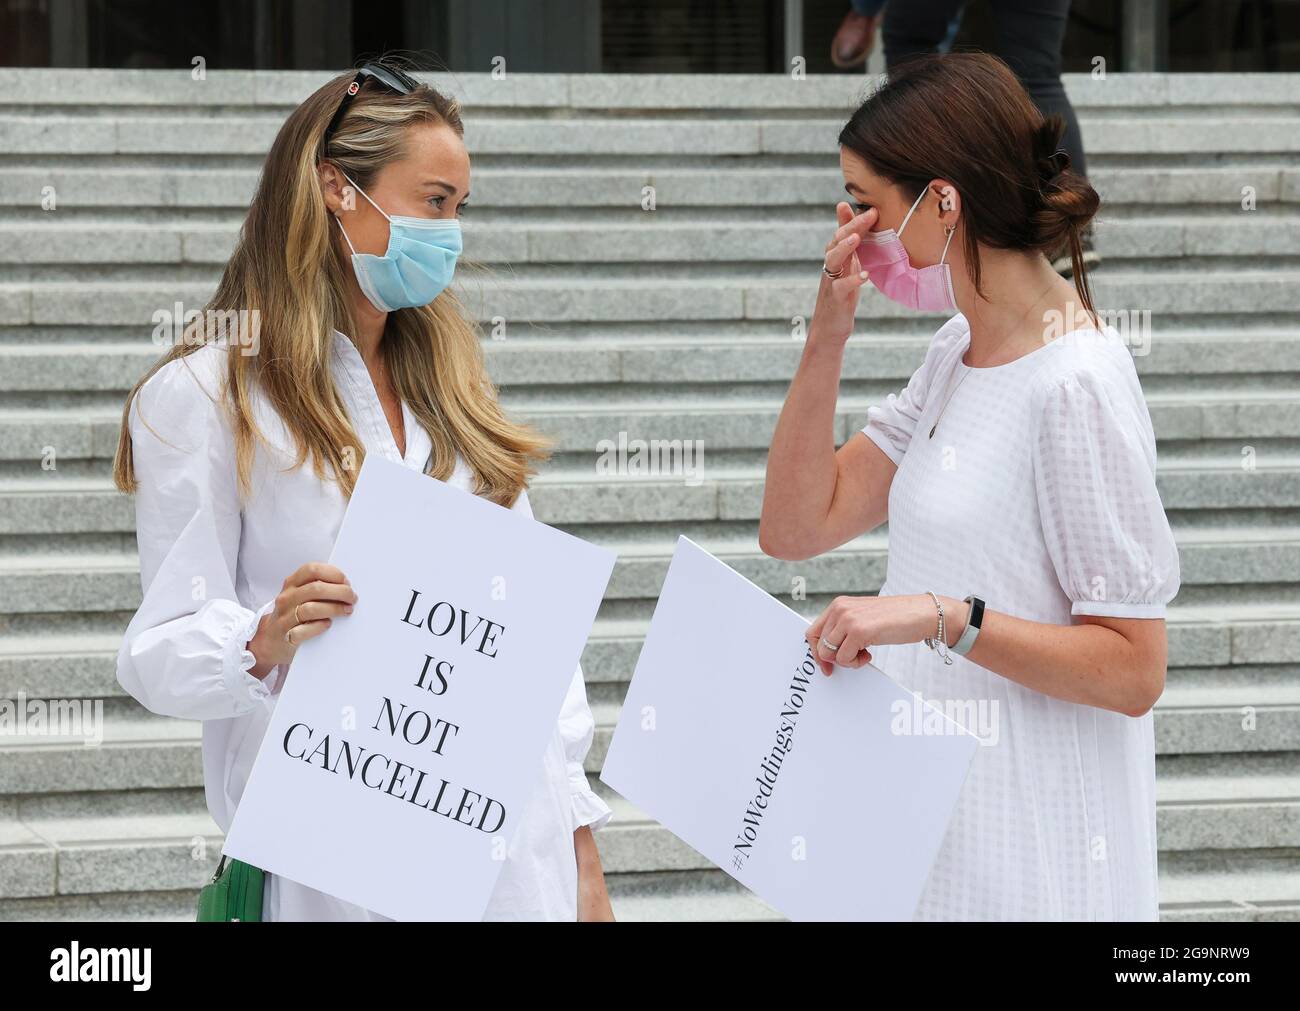 Dublin, Ireland. 27/07/2021 Brides to be, protest outside the Department of Health in Dublin, Ireland, over restricted guest numbers at weddings over Covid-19 restrictions. Pictured are (l to r) Orla O’Huadhaigh and Ali O'Mara as a group of brides-to-be outside the Department of Health on Baggot Street to present their health & safety guidelines in a bid to allow their weddings go ahead this year. The centrepiece of the 40 pages of guidelines is to seek to safely raise the guest limit for wedding receptions to 100 guests from August. Photograph: Sam Boal / RollingNews.ie Stock Photo